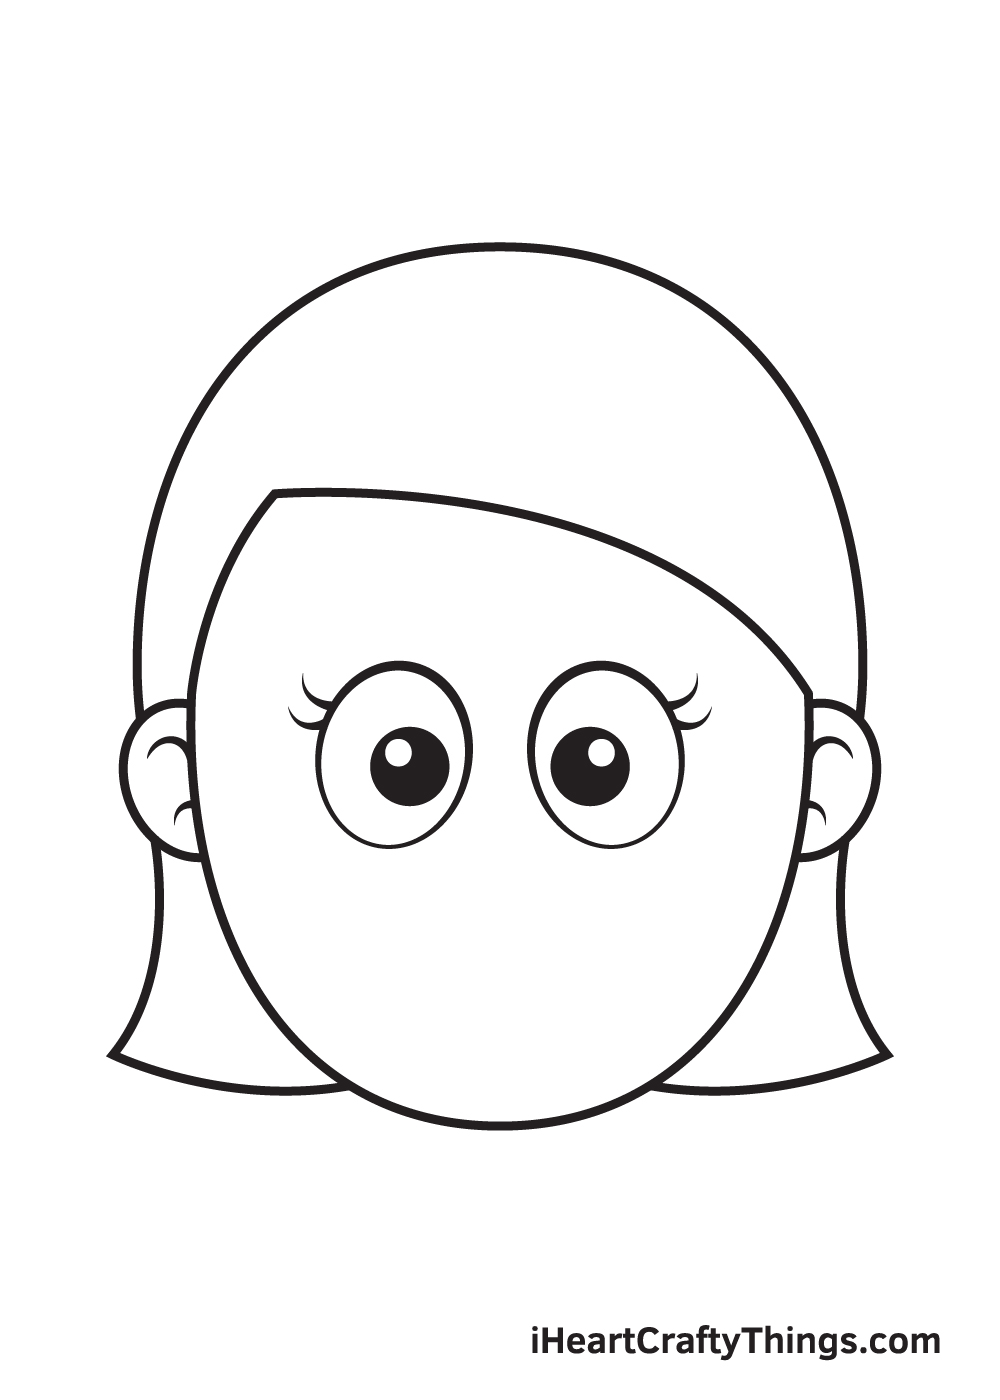 Girl Face Drawing - How To Draw A Girl Face Step By Step